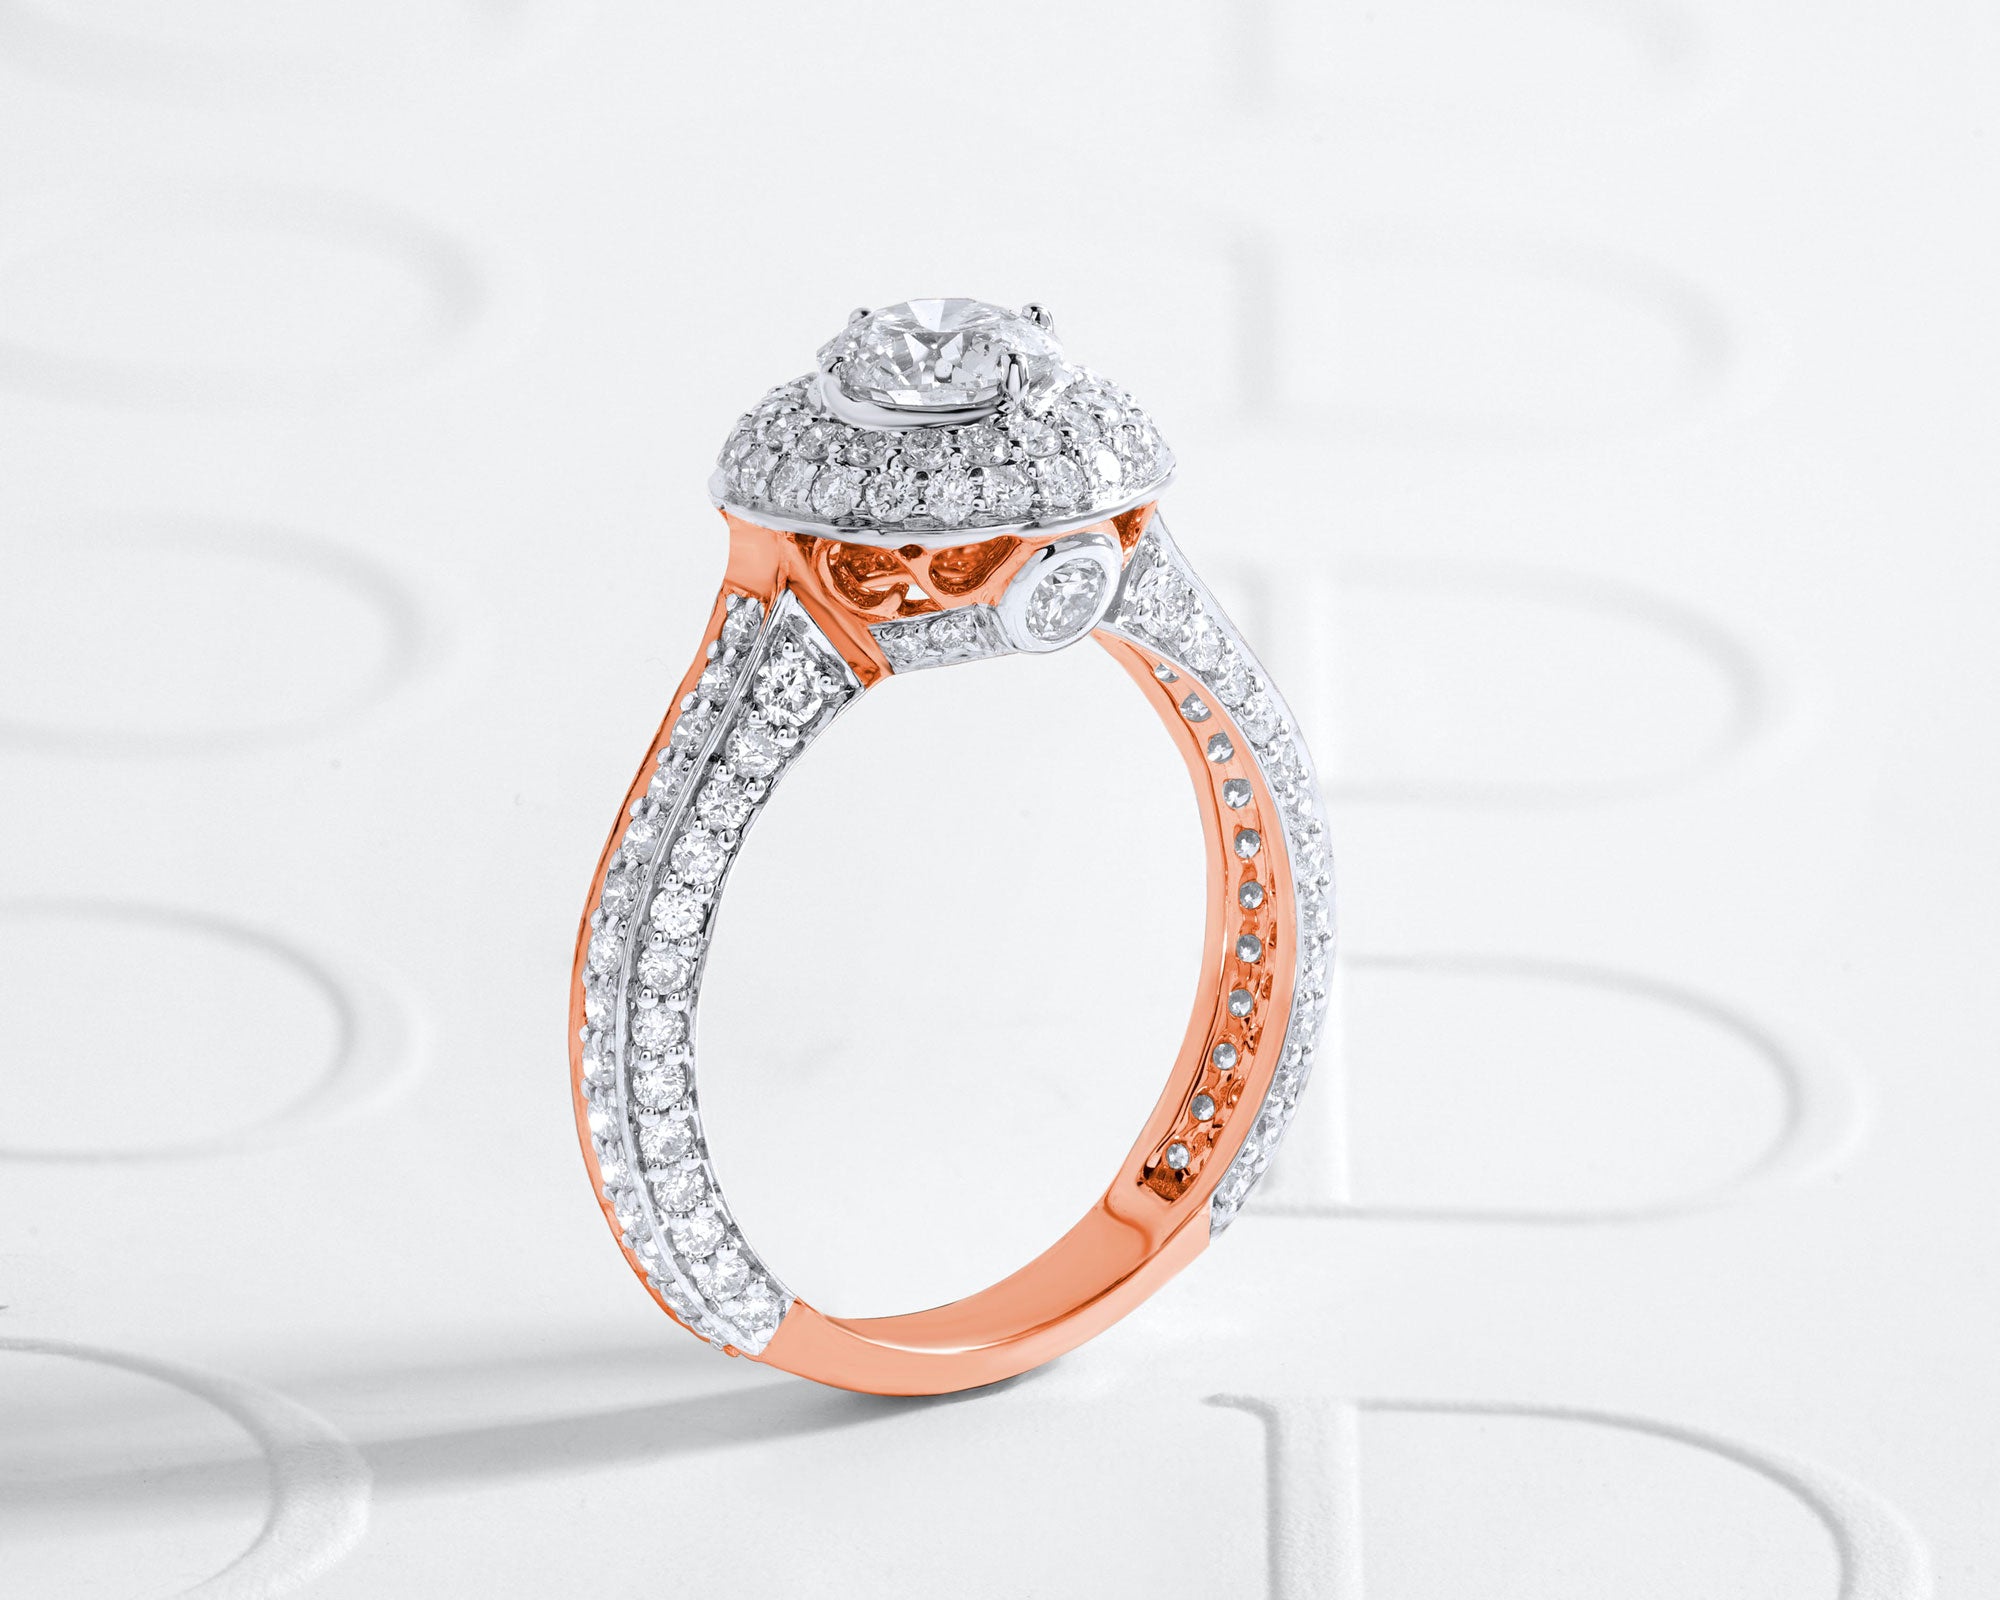 How to Select an Engagement Ring: Determining Quality, Price, and Ring Size